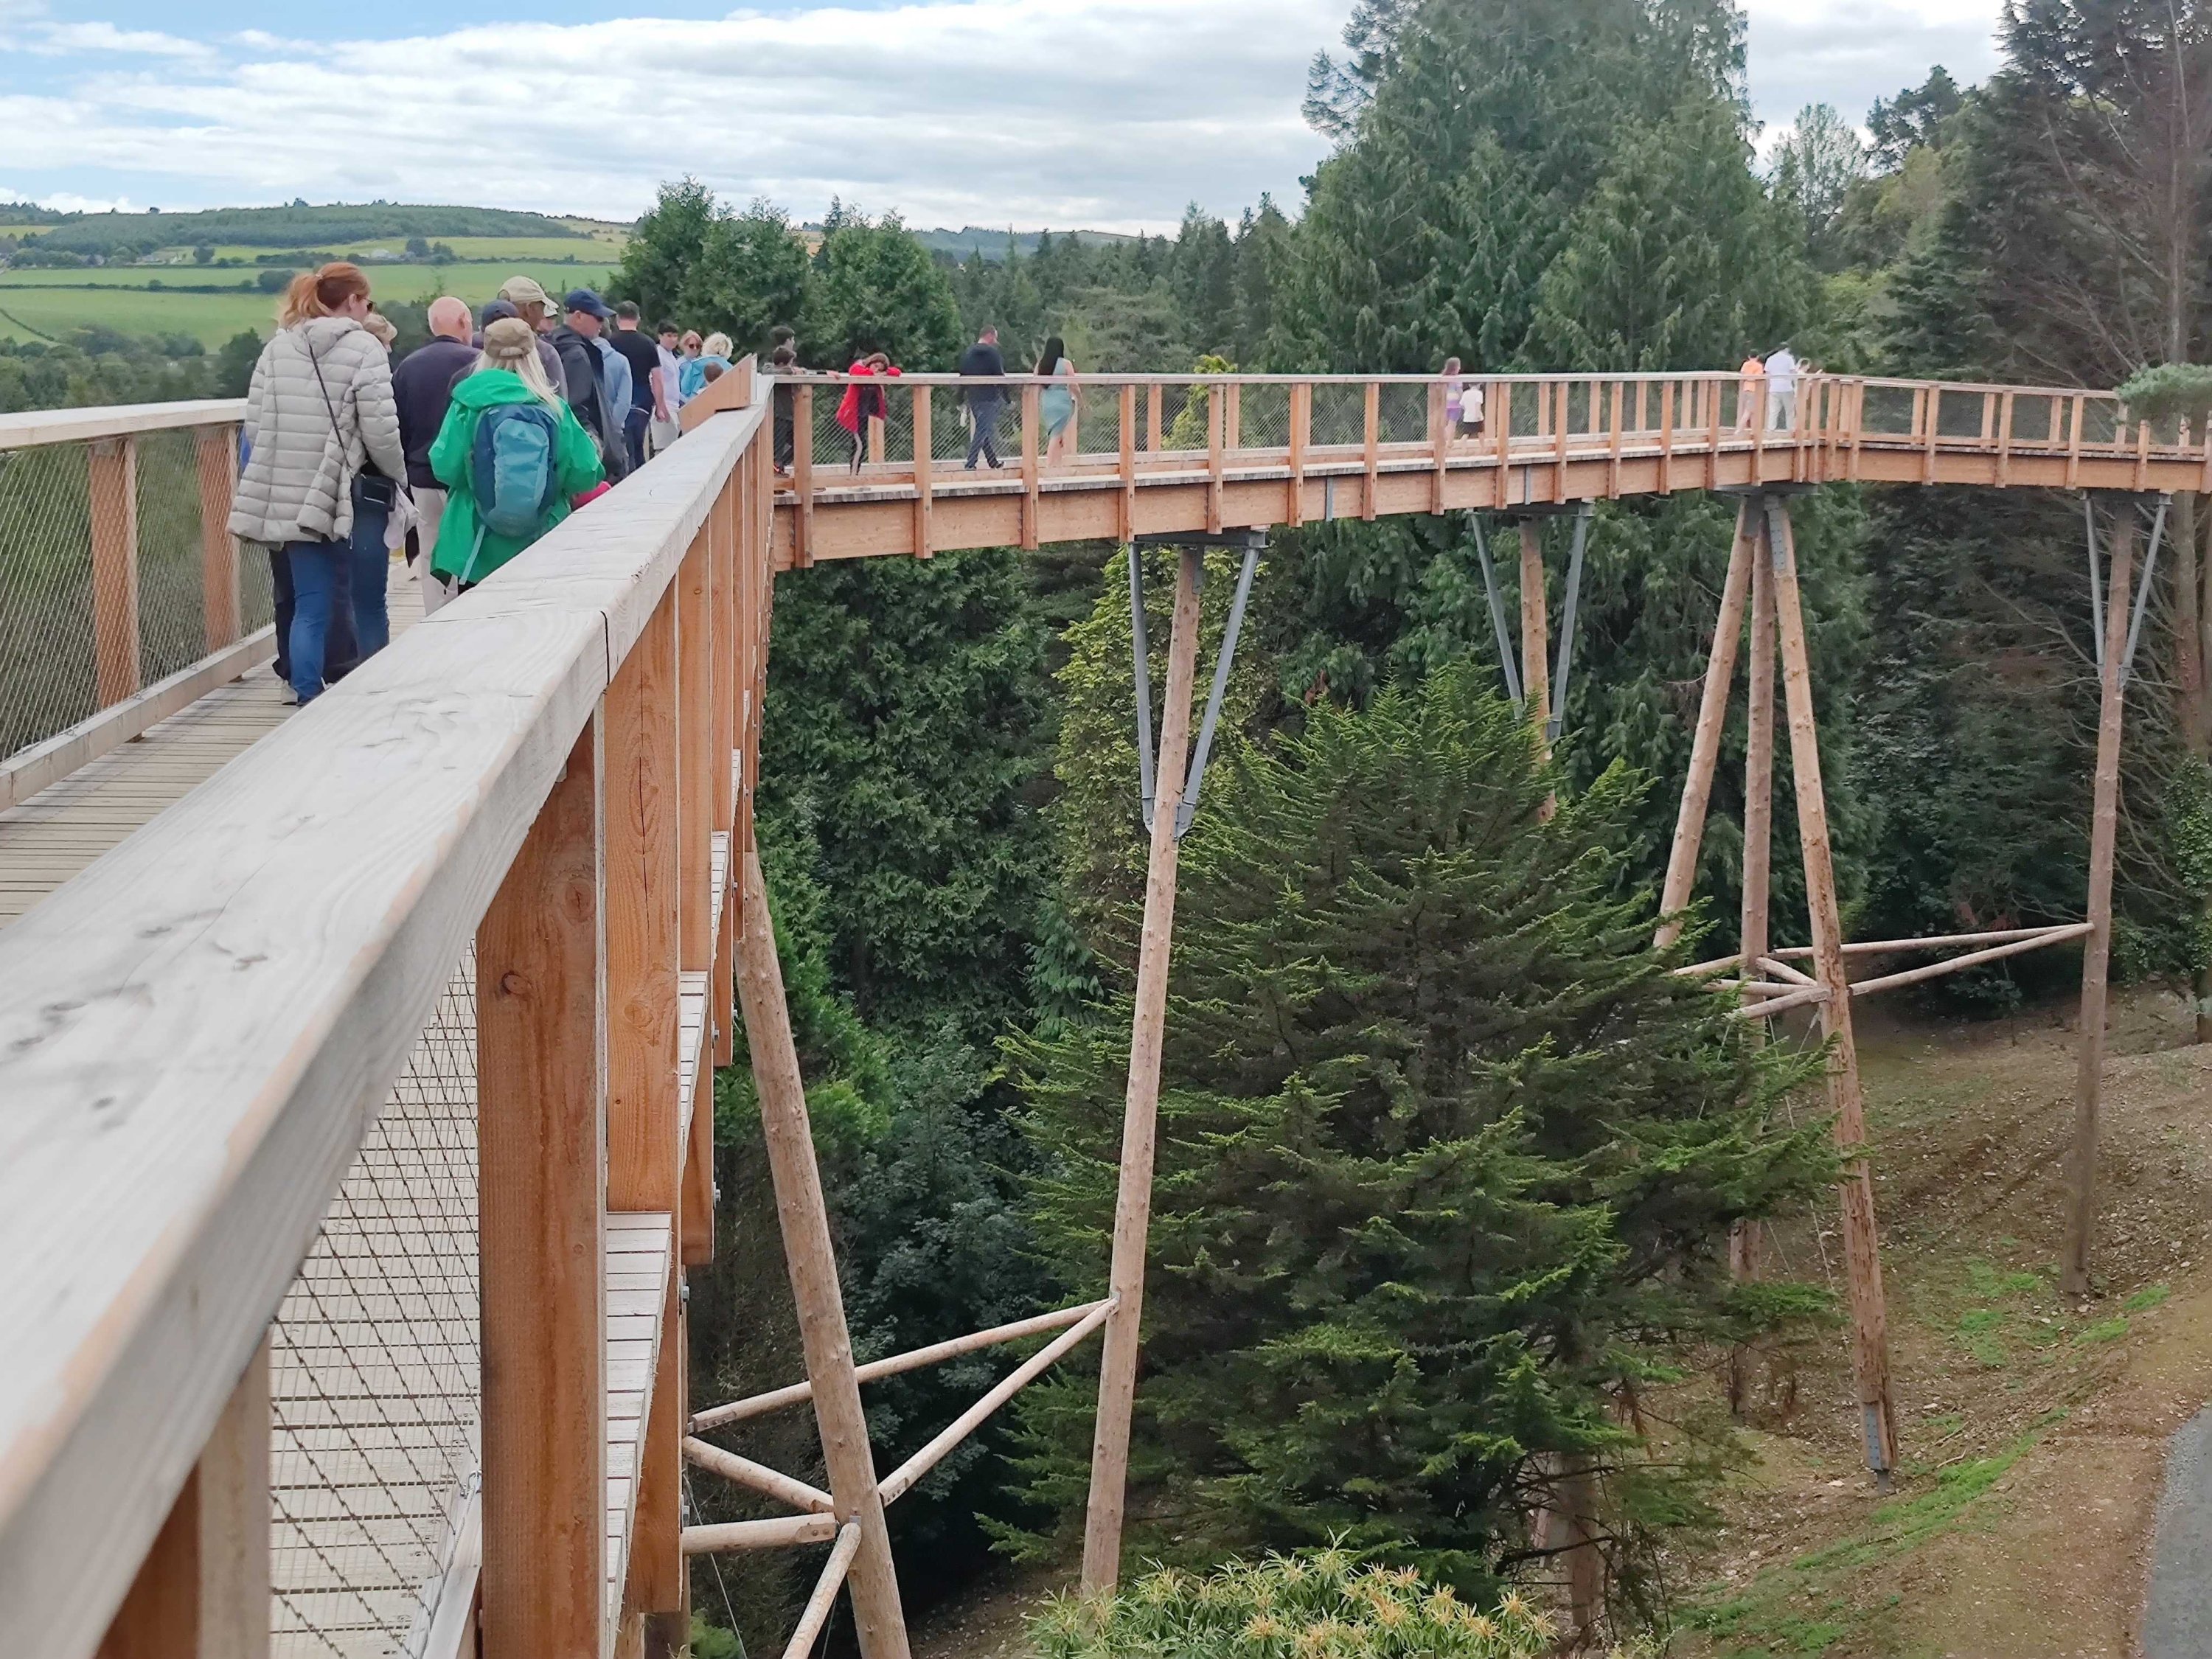 Ireland's new treetop walk takes visitors over a forest park by the Wicklow Mountains and is fast becoming a major tourist landmark for Dublin visitors, Ireland, July 30, 2022. (dpa Photo)